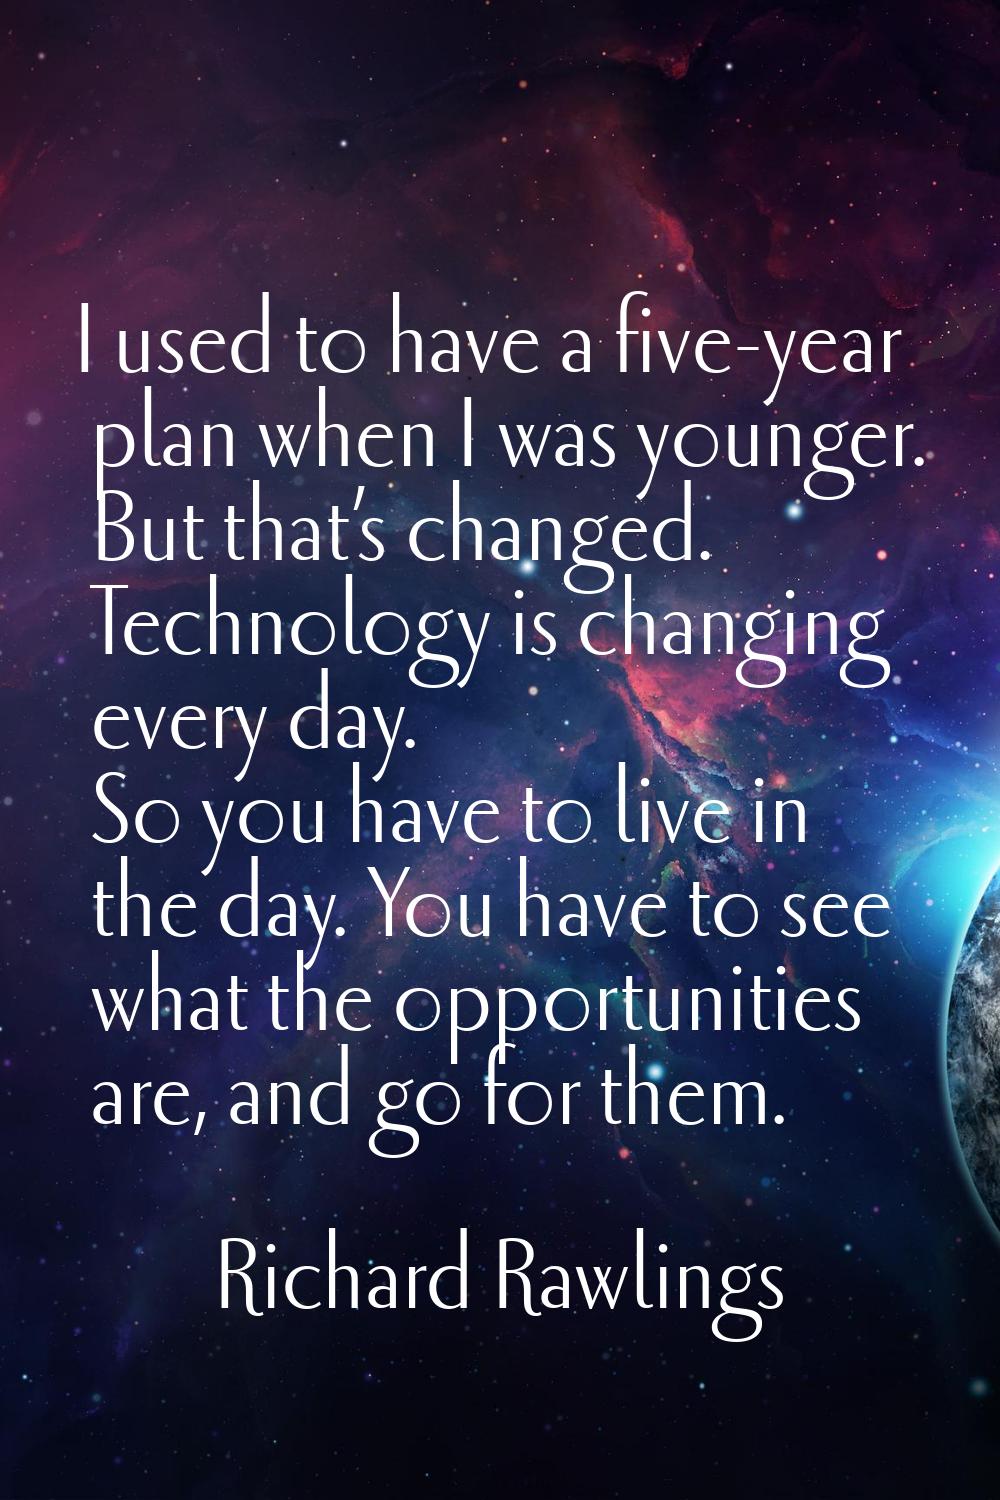 I used to have a five-year plan when I was younger. But that’s changed. Technology is changing ever